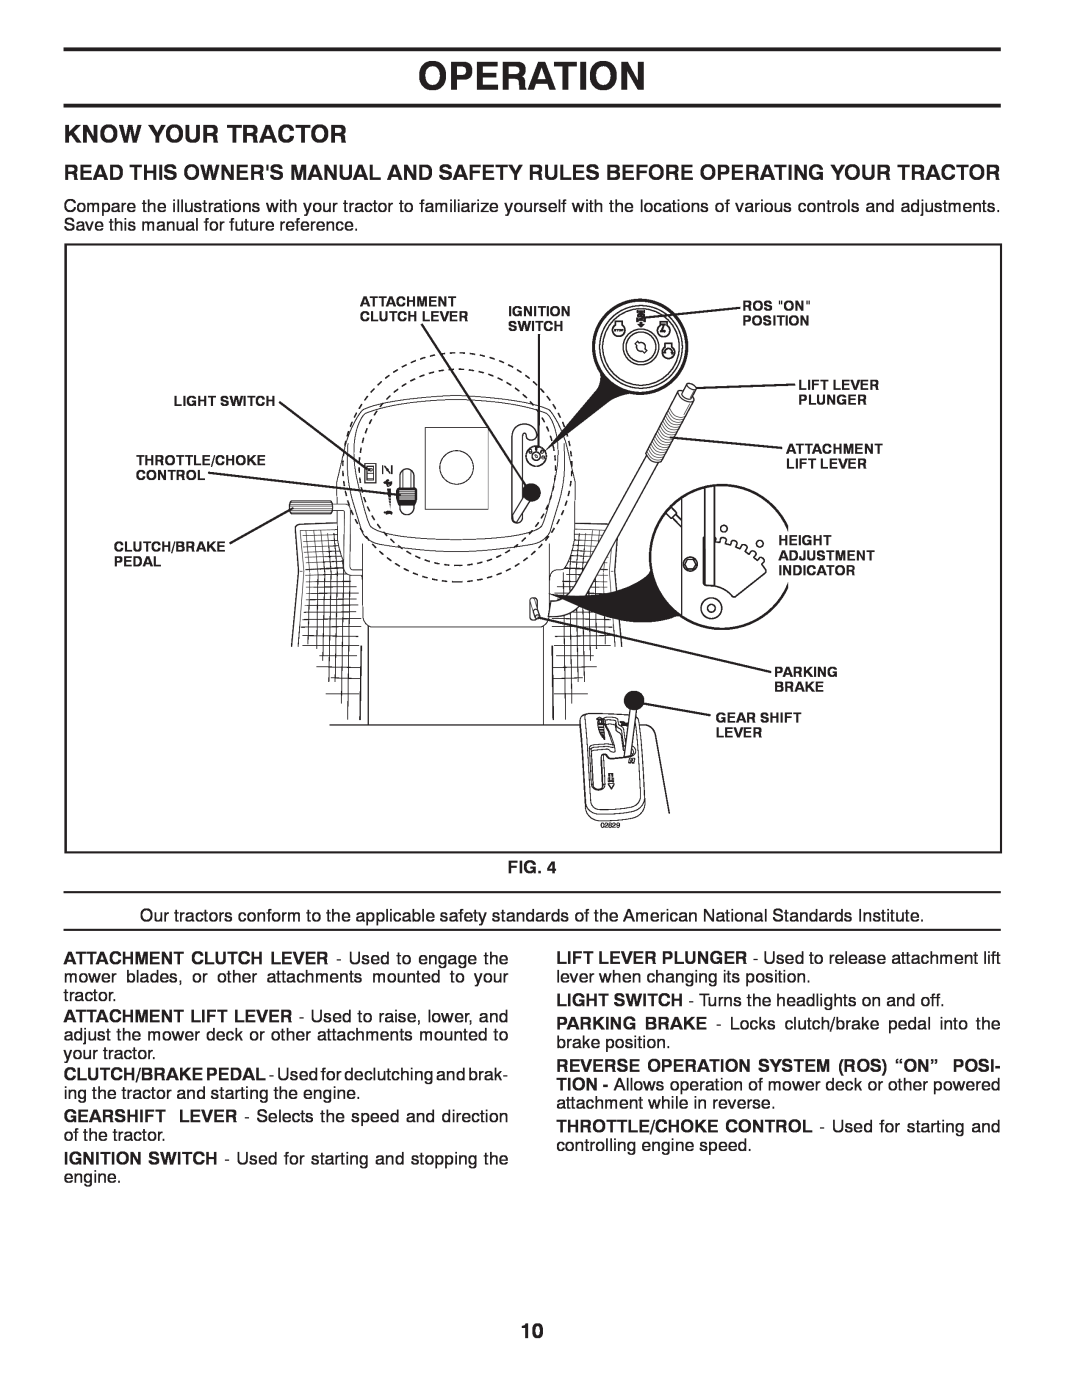 Poulan PP14538 manual Know Your Tractor, Operation 